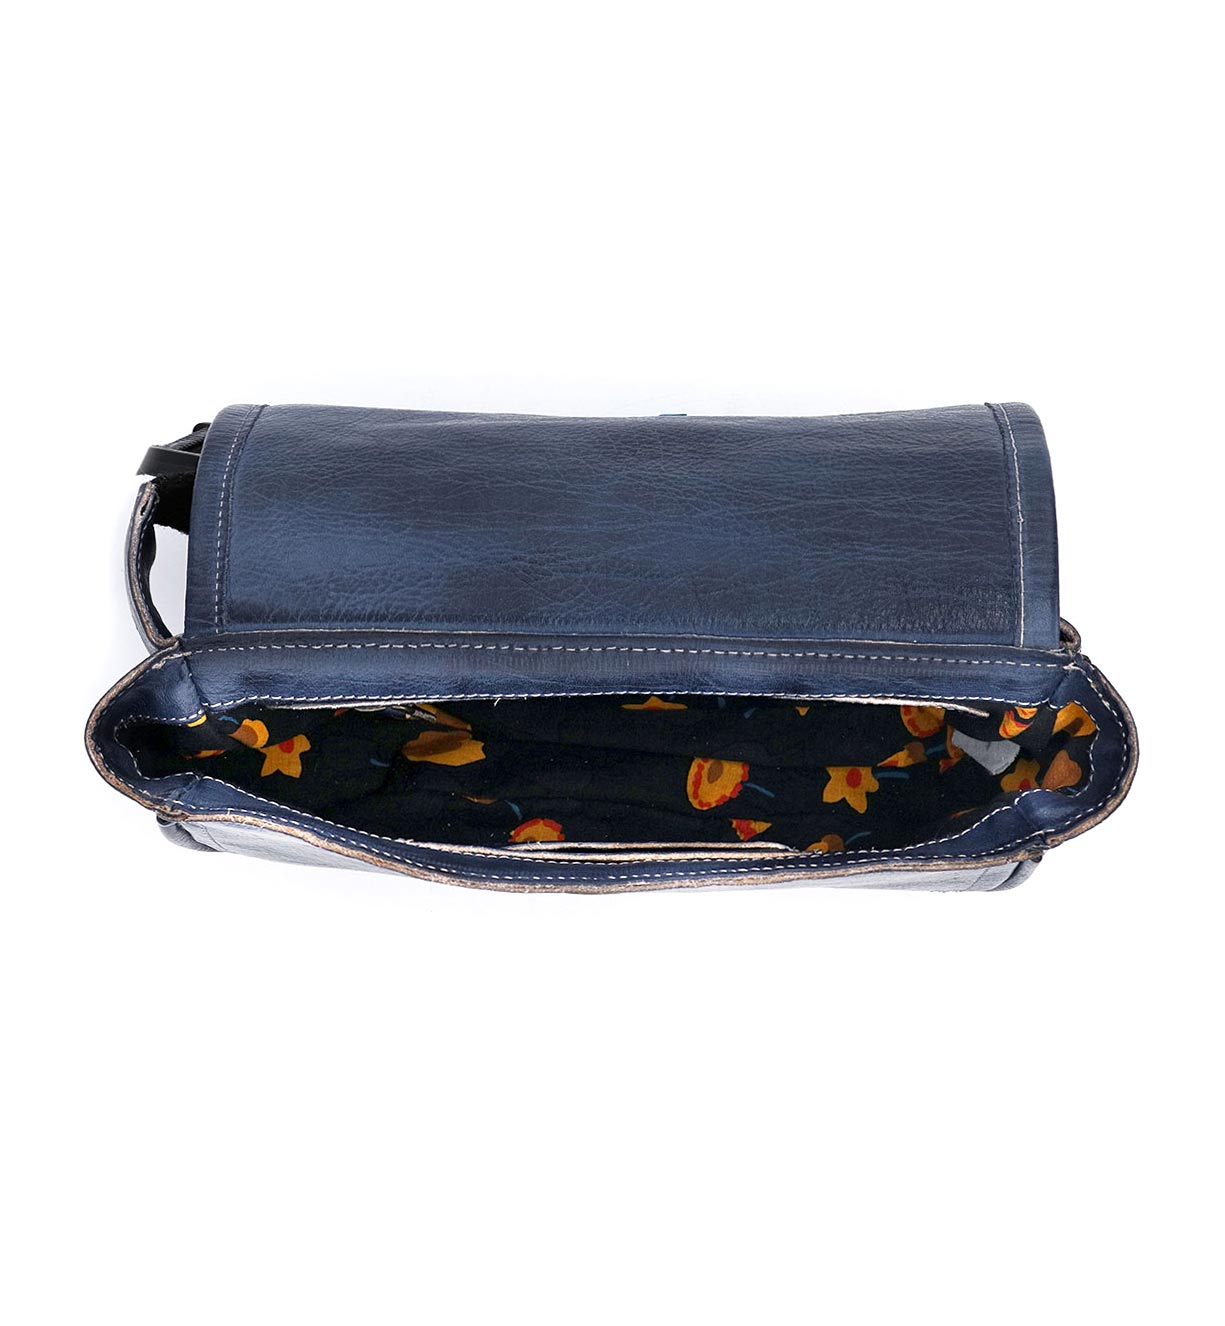 A Travers purse by Bed Stu, made of blue leather with a flower on it.